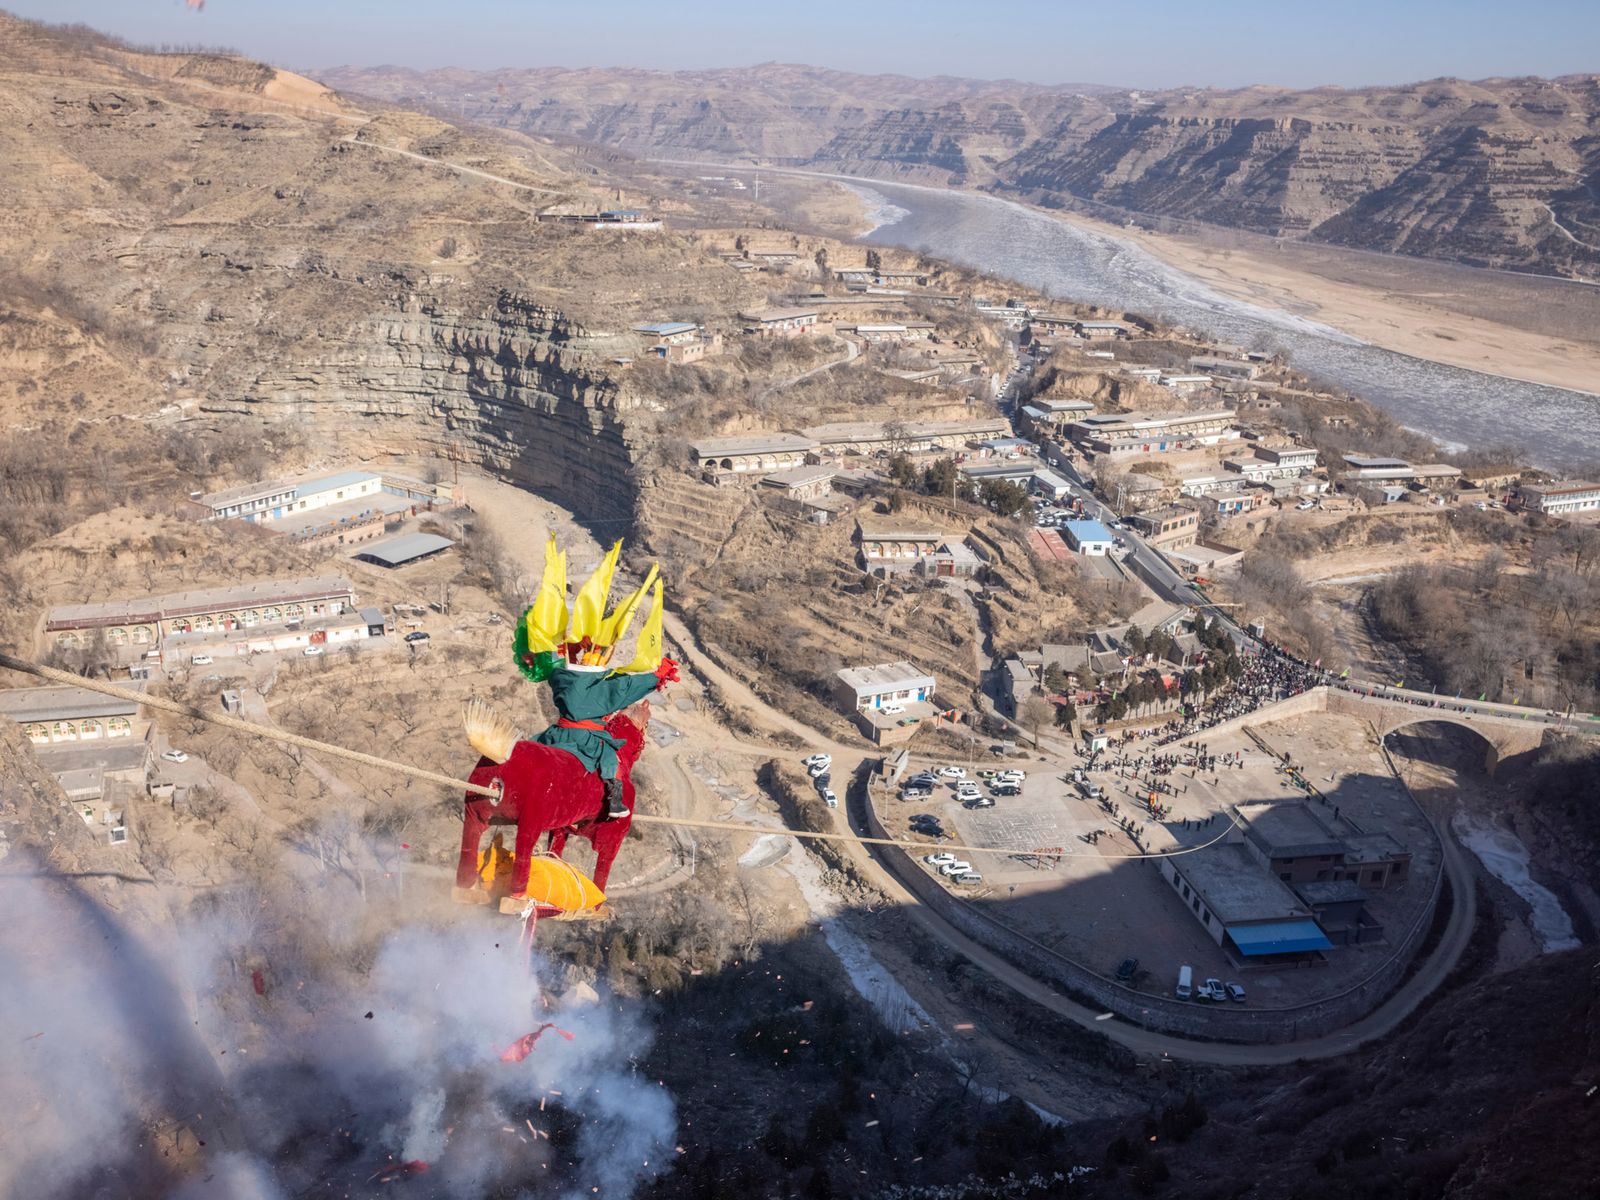 © Pan Wang - Image from the The Yellow River, Qin Jin Grand Canyon photography project